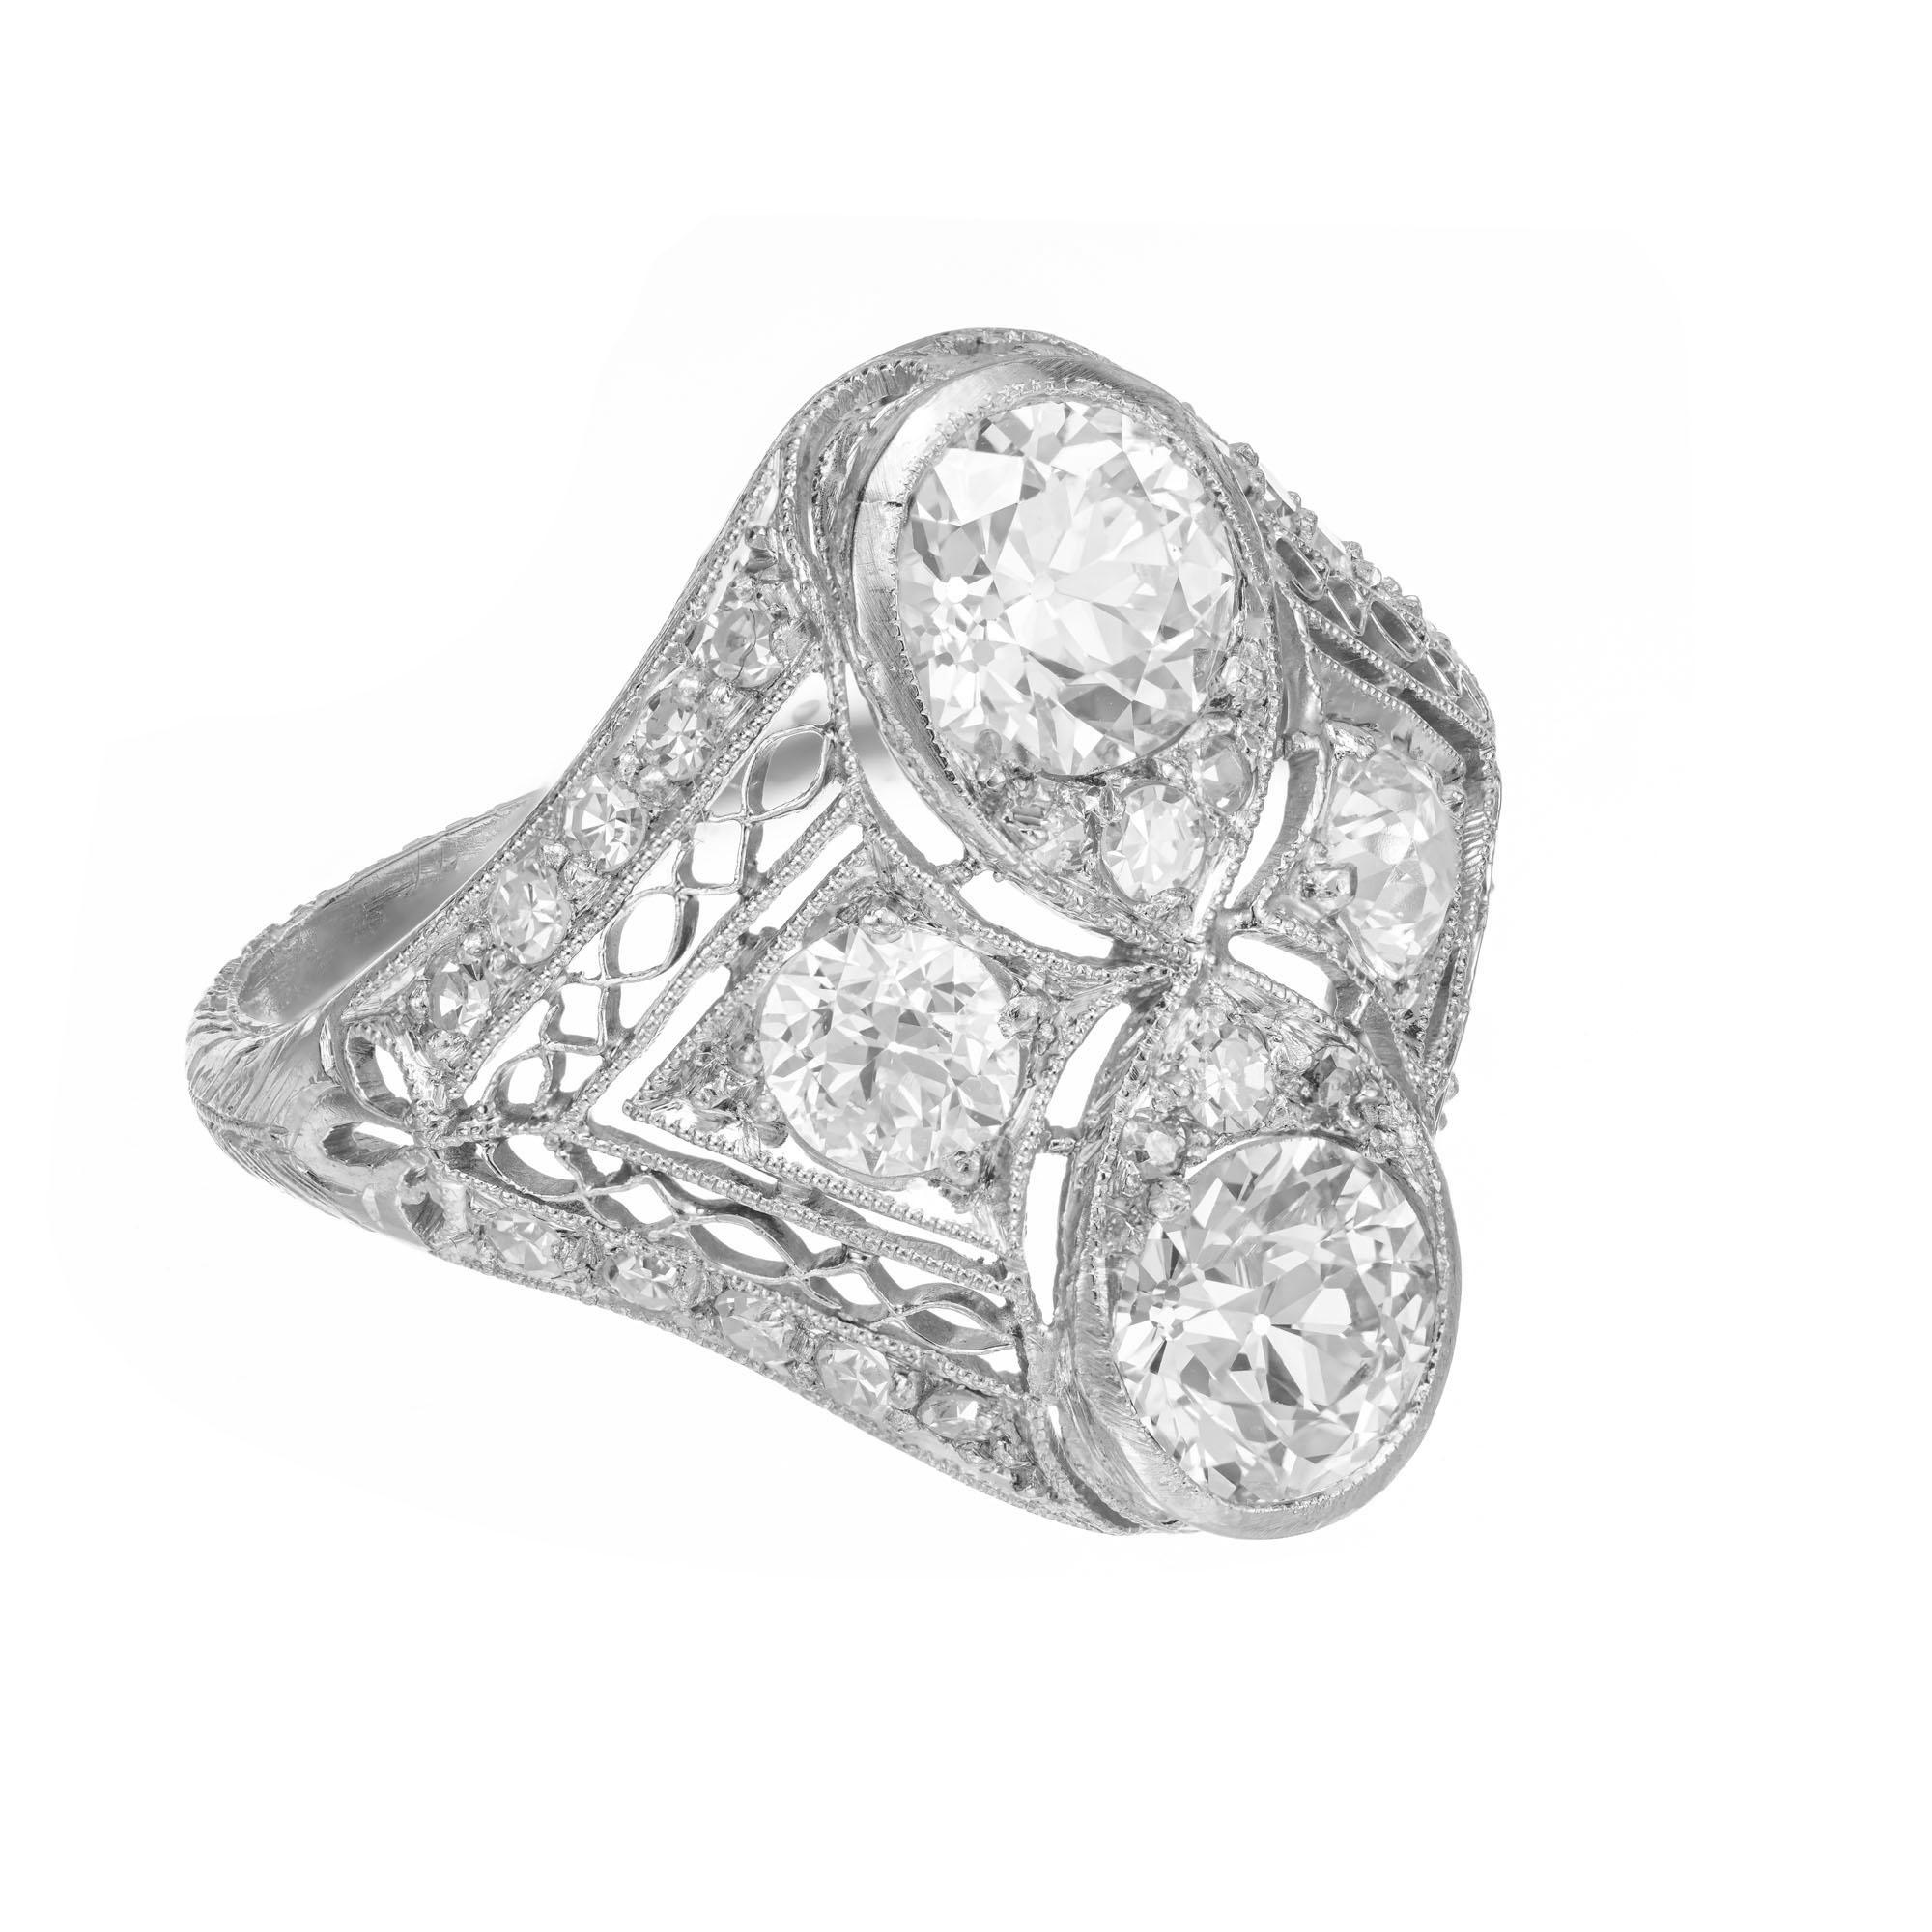 2.14 Carat Diamond Filigree Old European Cut Platinum Ring In Good Condition For Sale In Stamford, CT